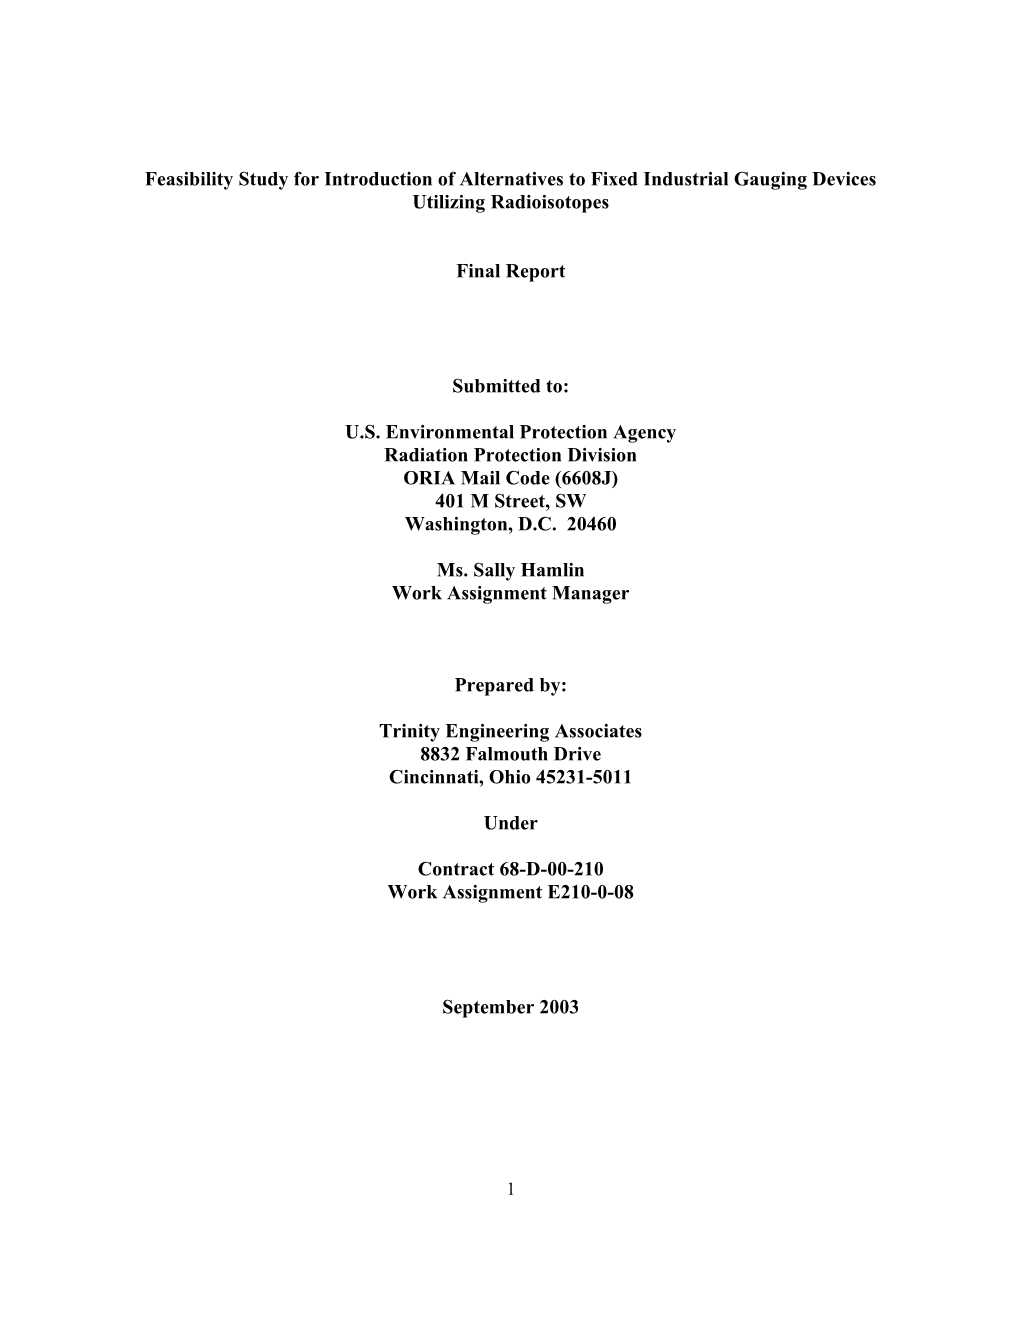 Feasibility Study for Introduction of Alternatives to Fixed Industrial Gauging Devices